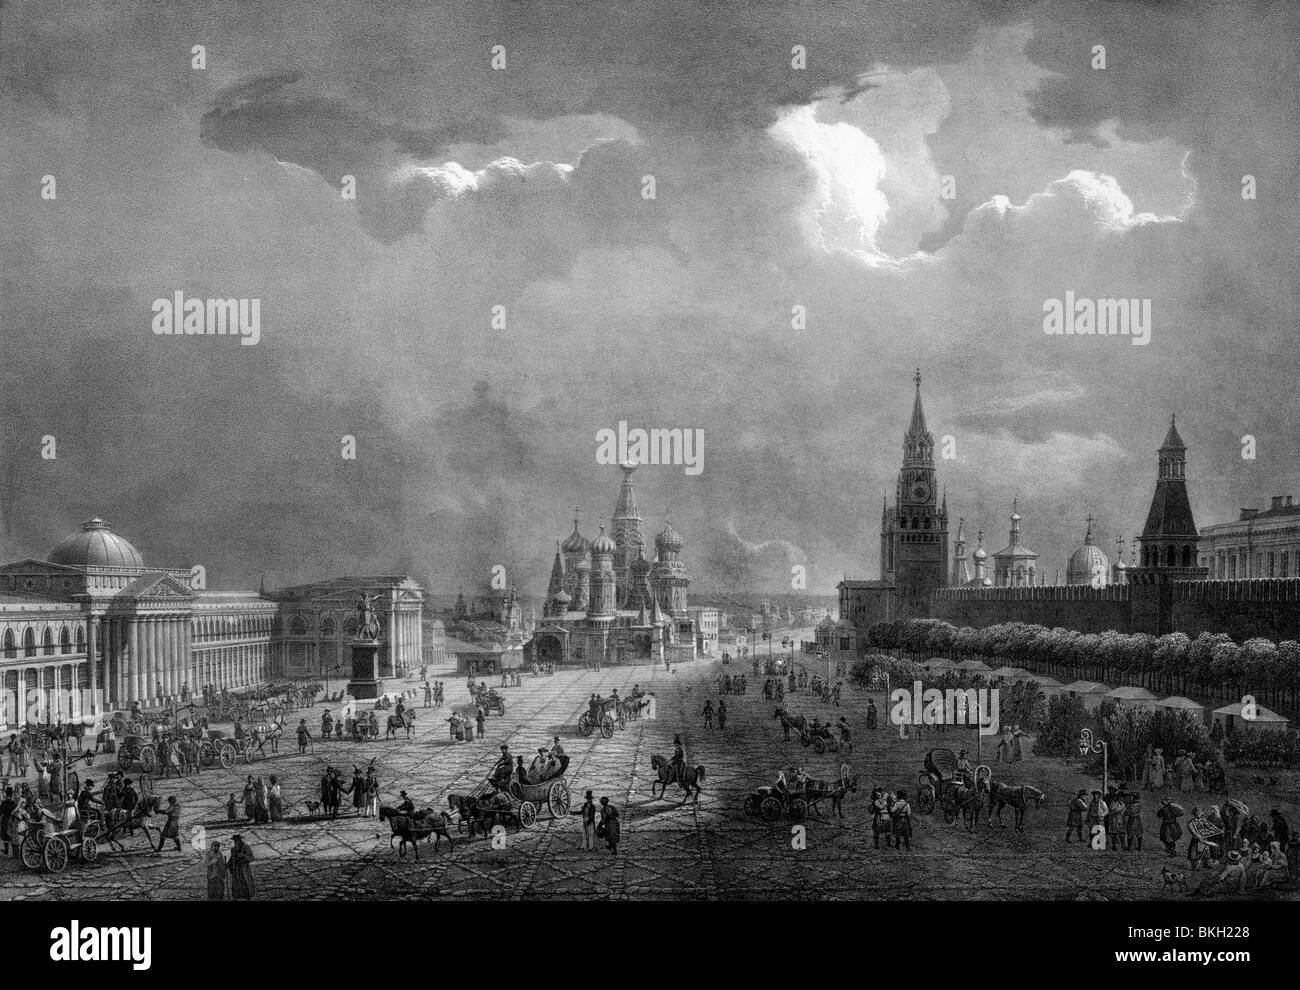 Vintage lithograph print circa 1830s depicting the view across the plaza at the Kremlin in Moscow, Russia. Stock Photo